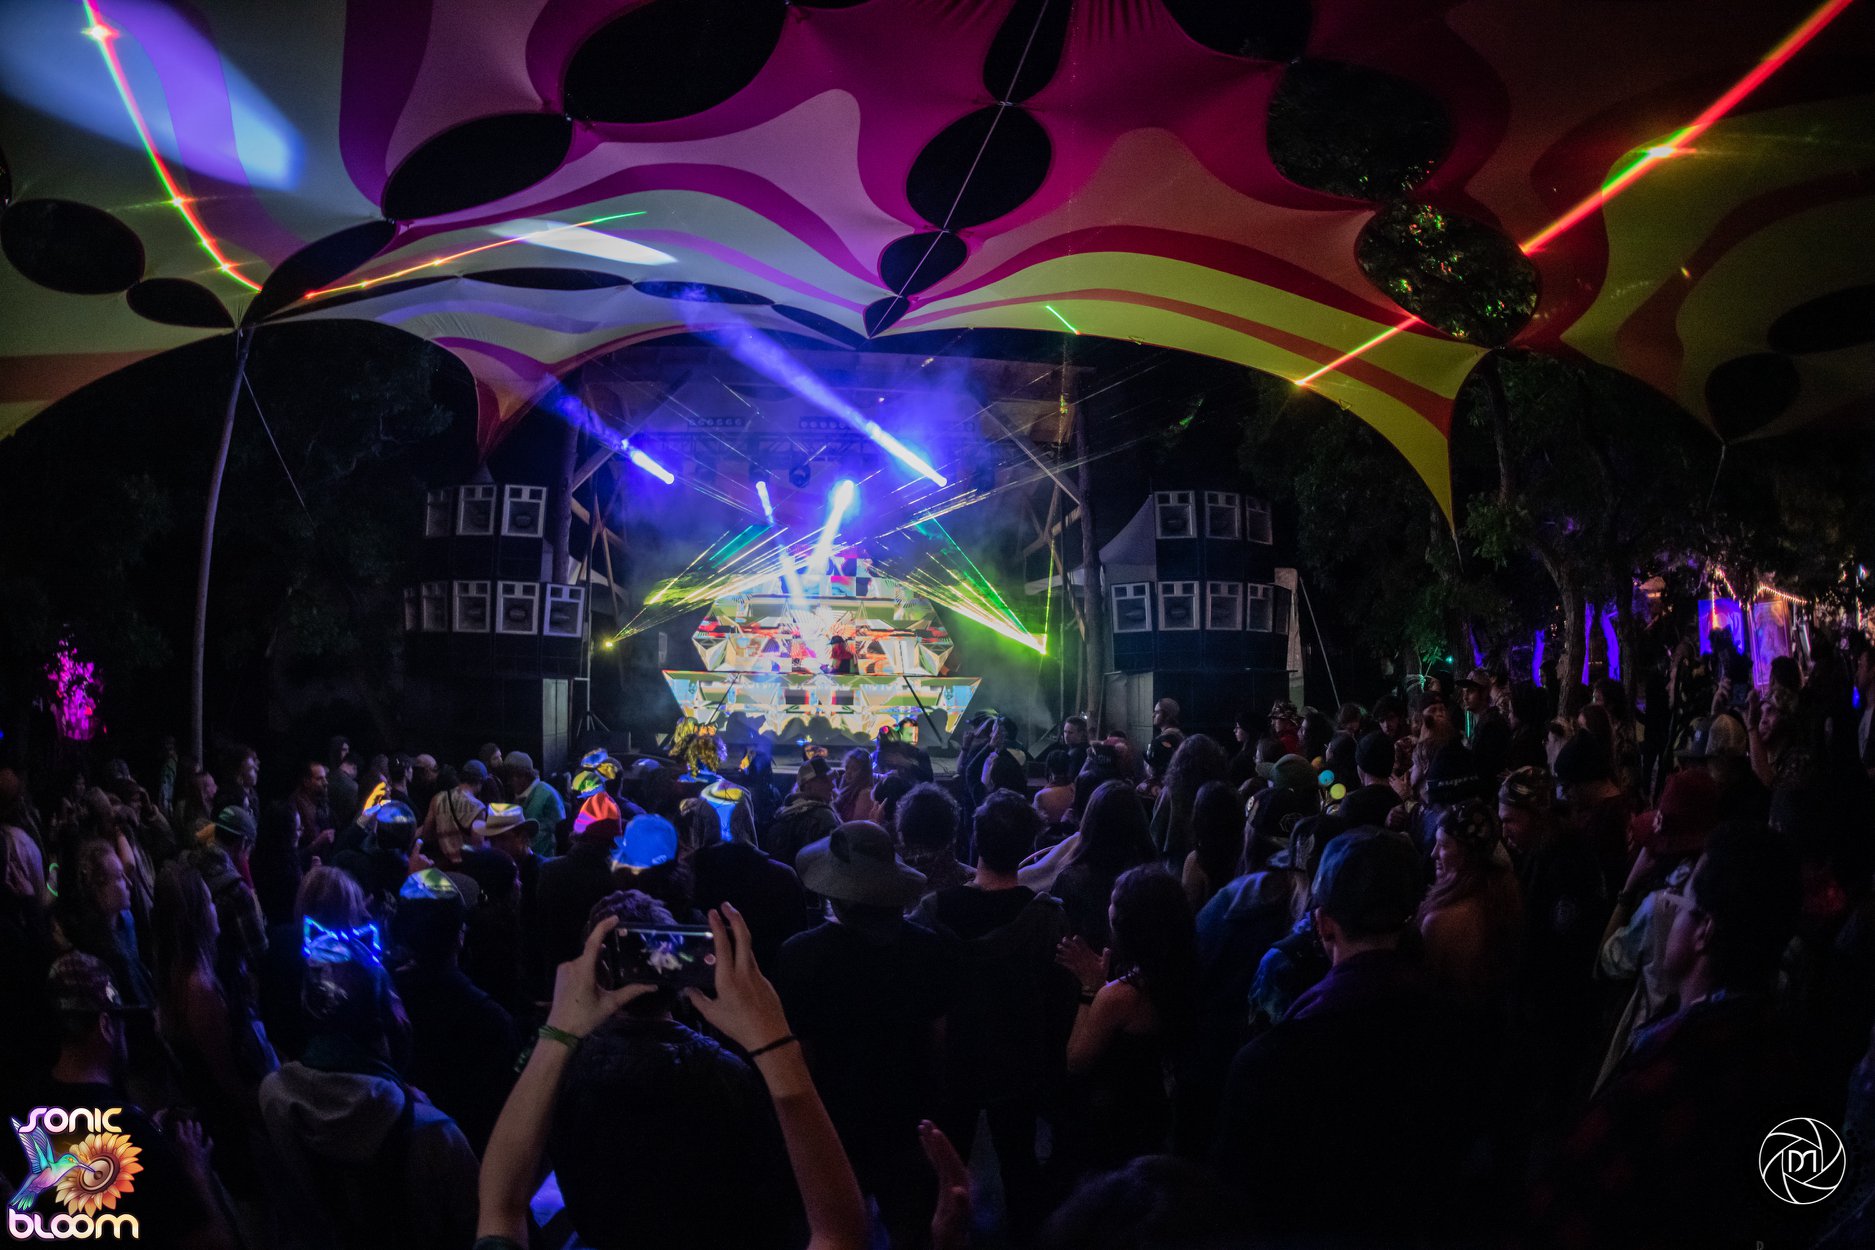 Cualli performing at Sonic Bloom